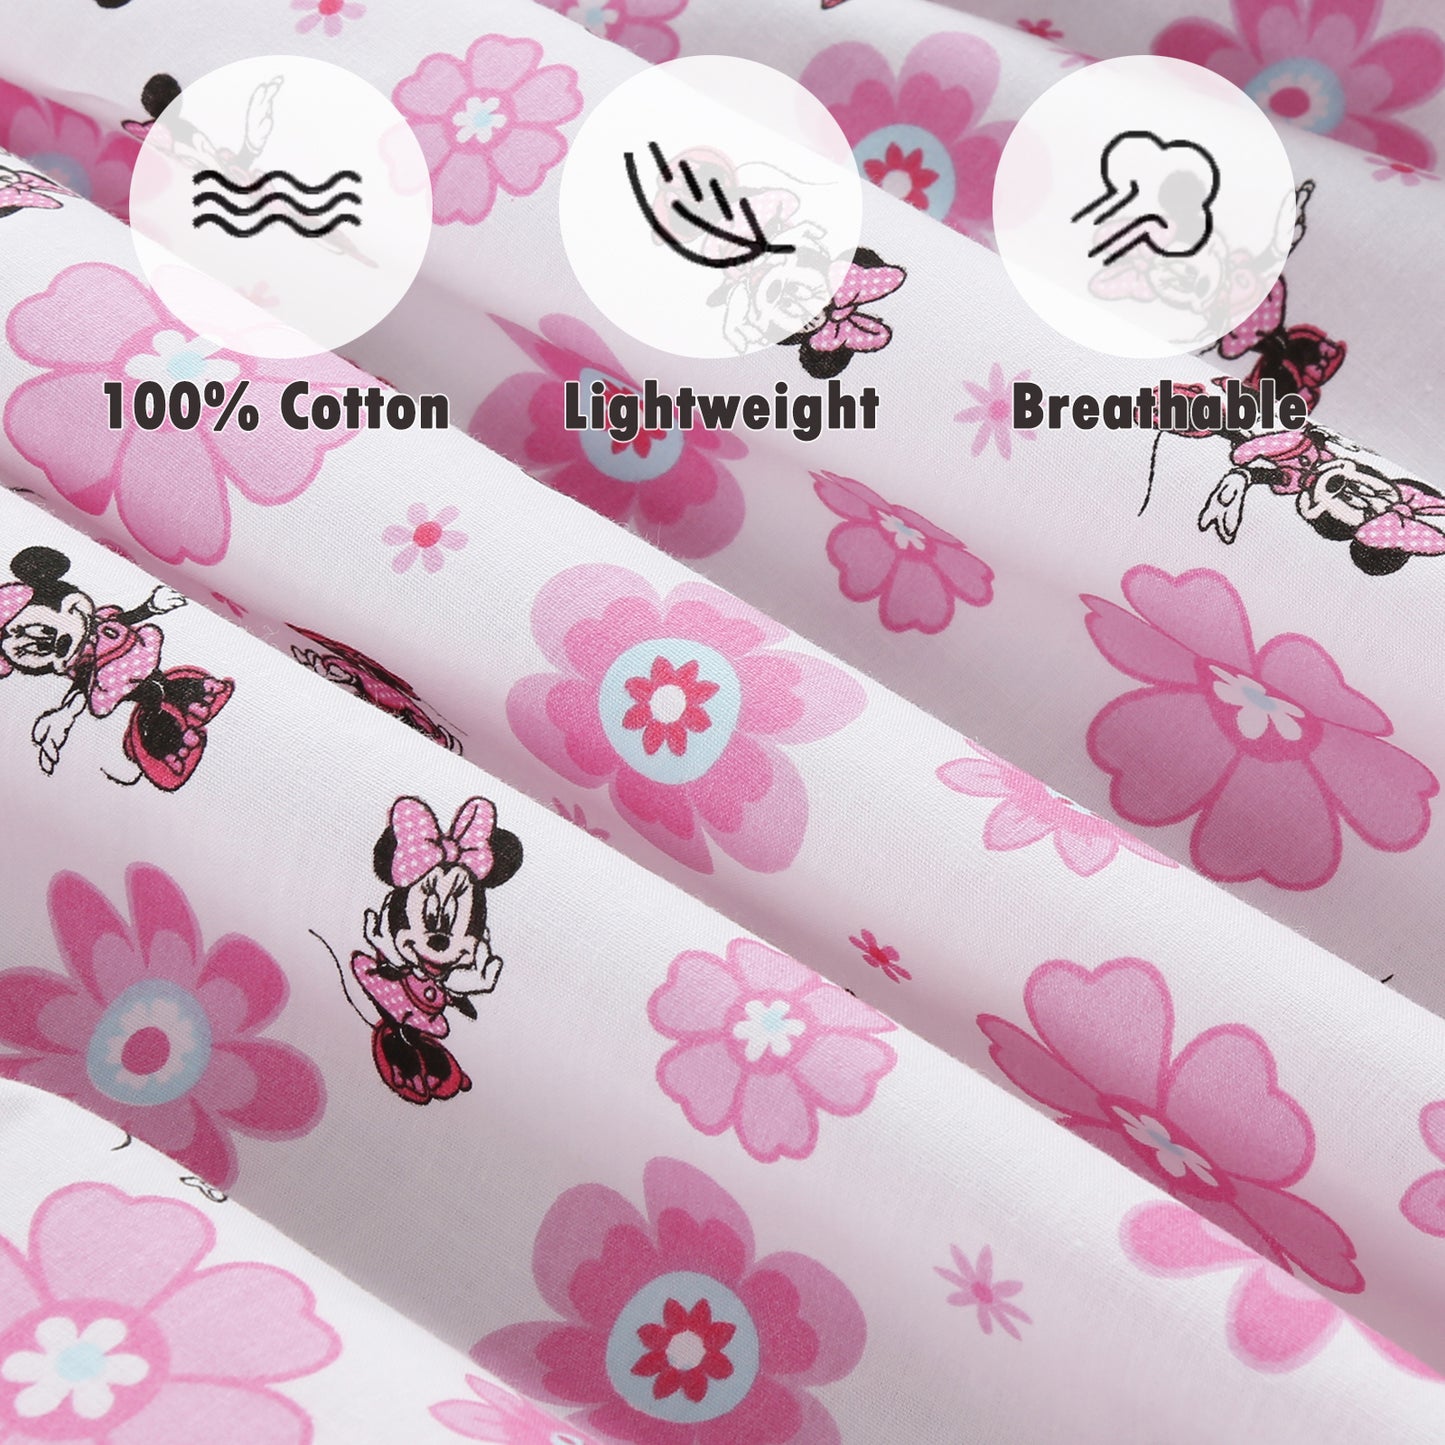 3 Piece Crib/Toddler Cotton Fitted Sheets Minnie's Pink Garden Butterfly Peony Floral Blossoms